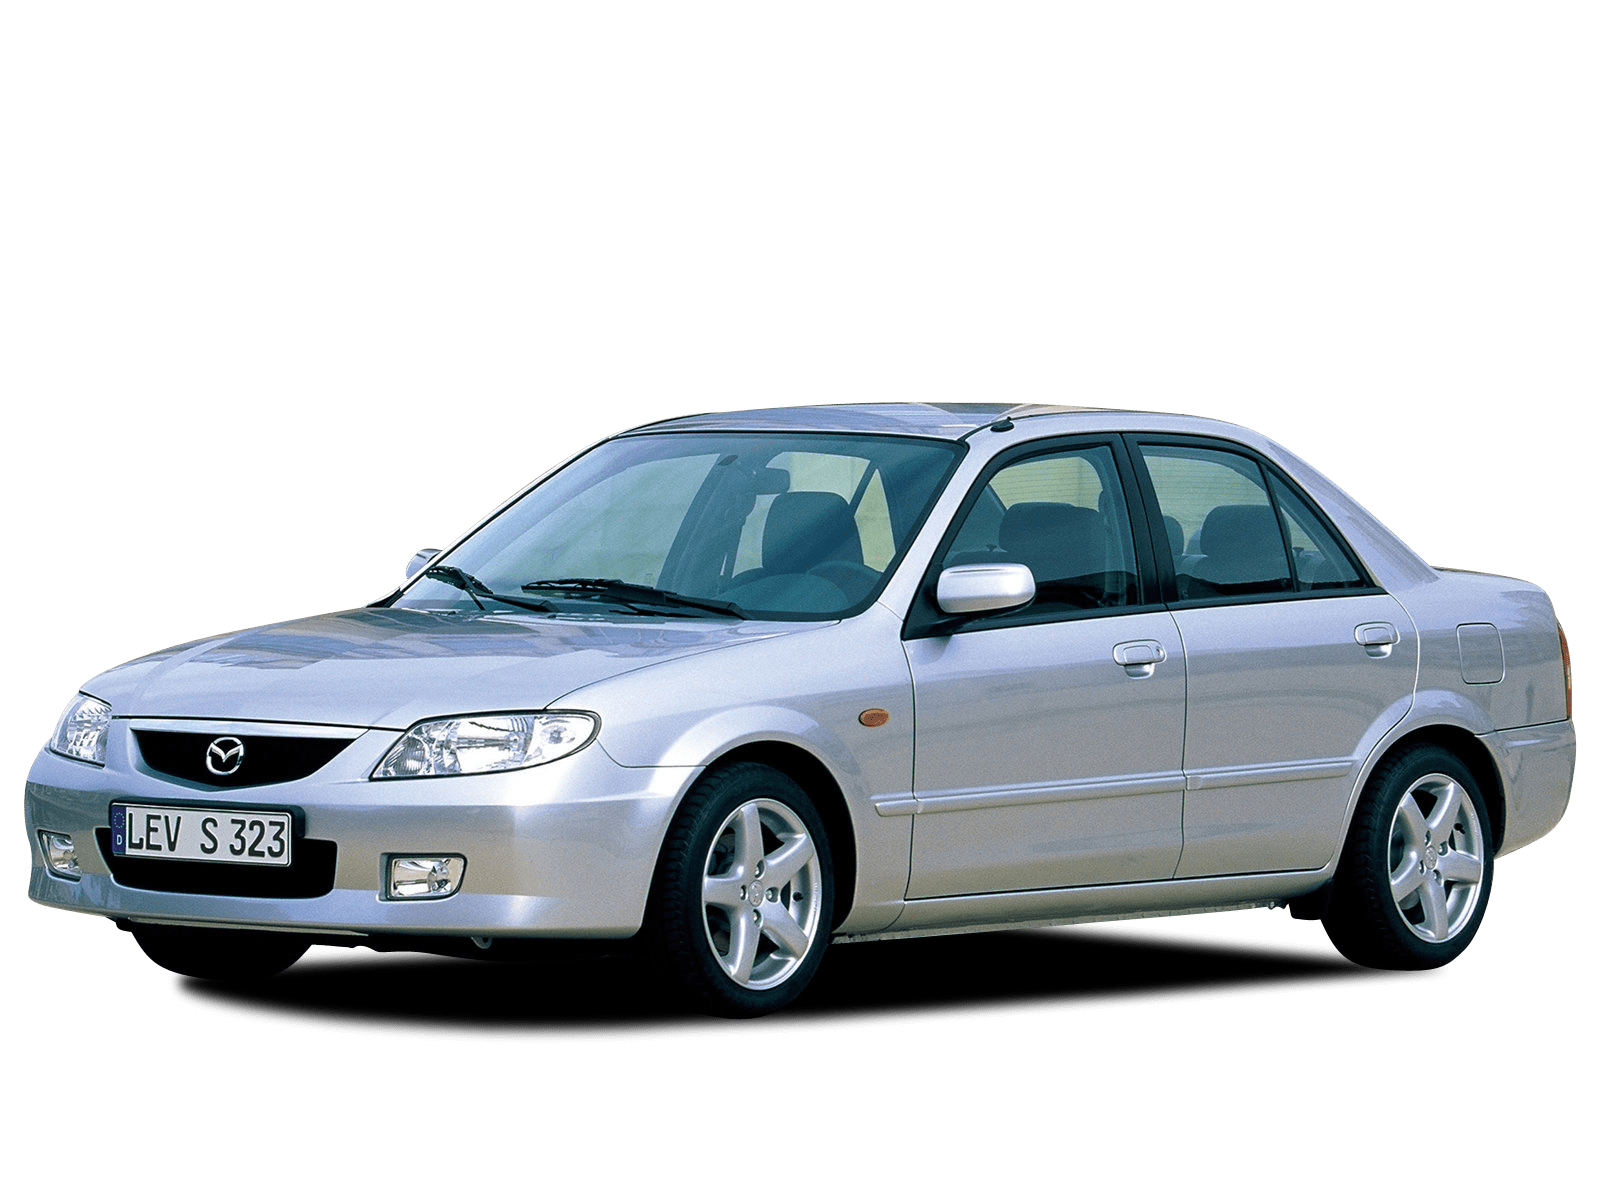 Mazda 323 Review, For Sale, Specs, Models & News in Australia | CarsGuide